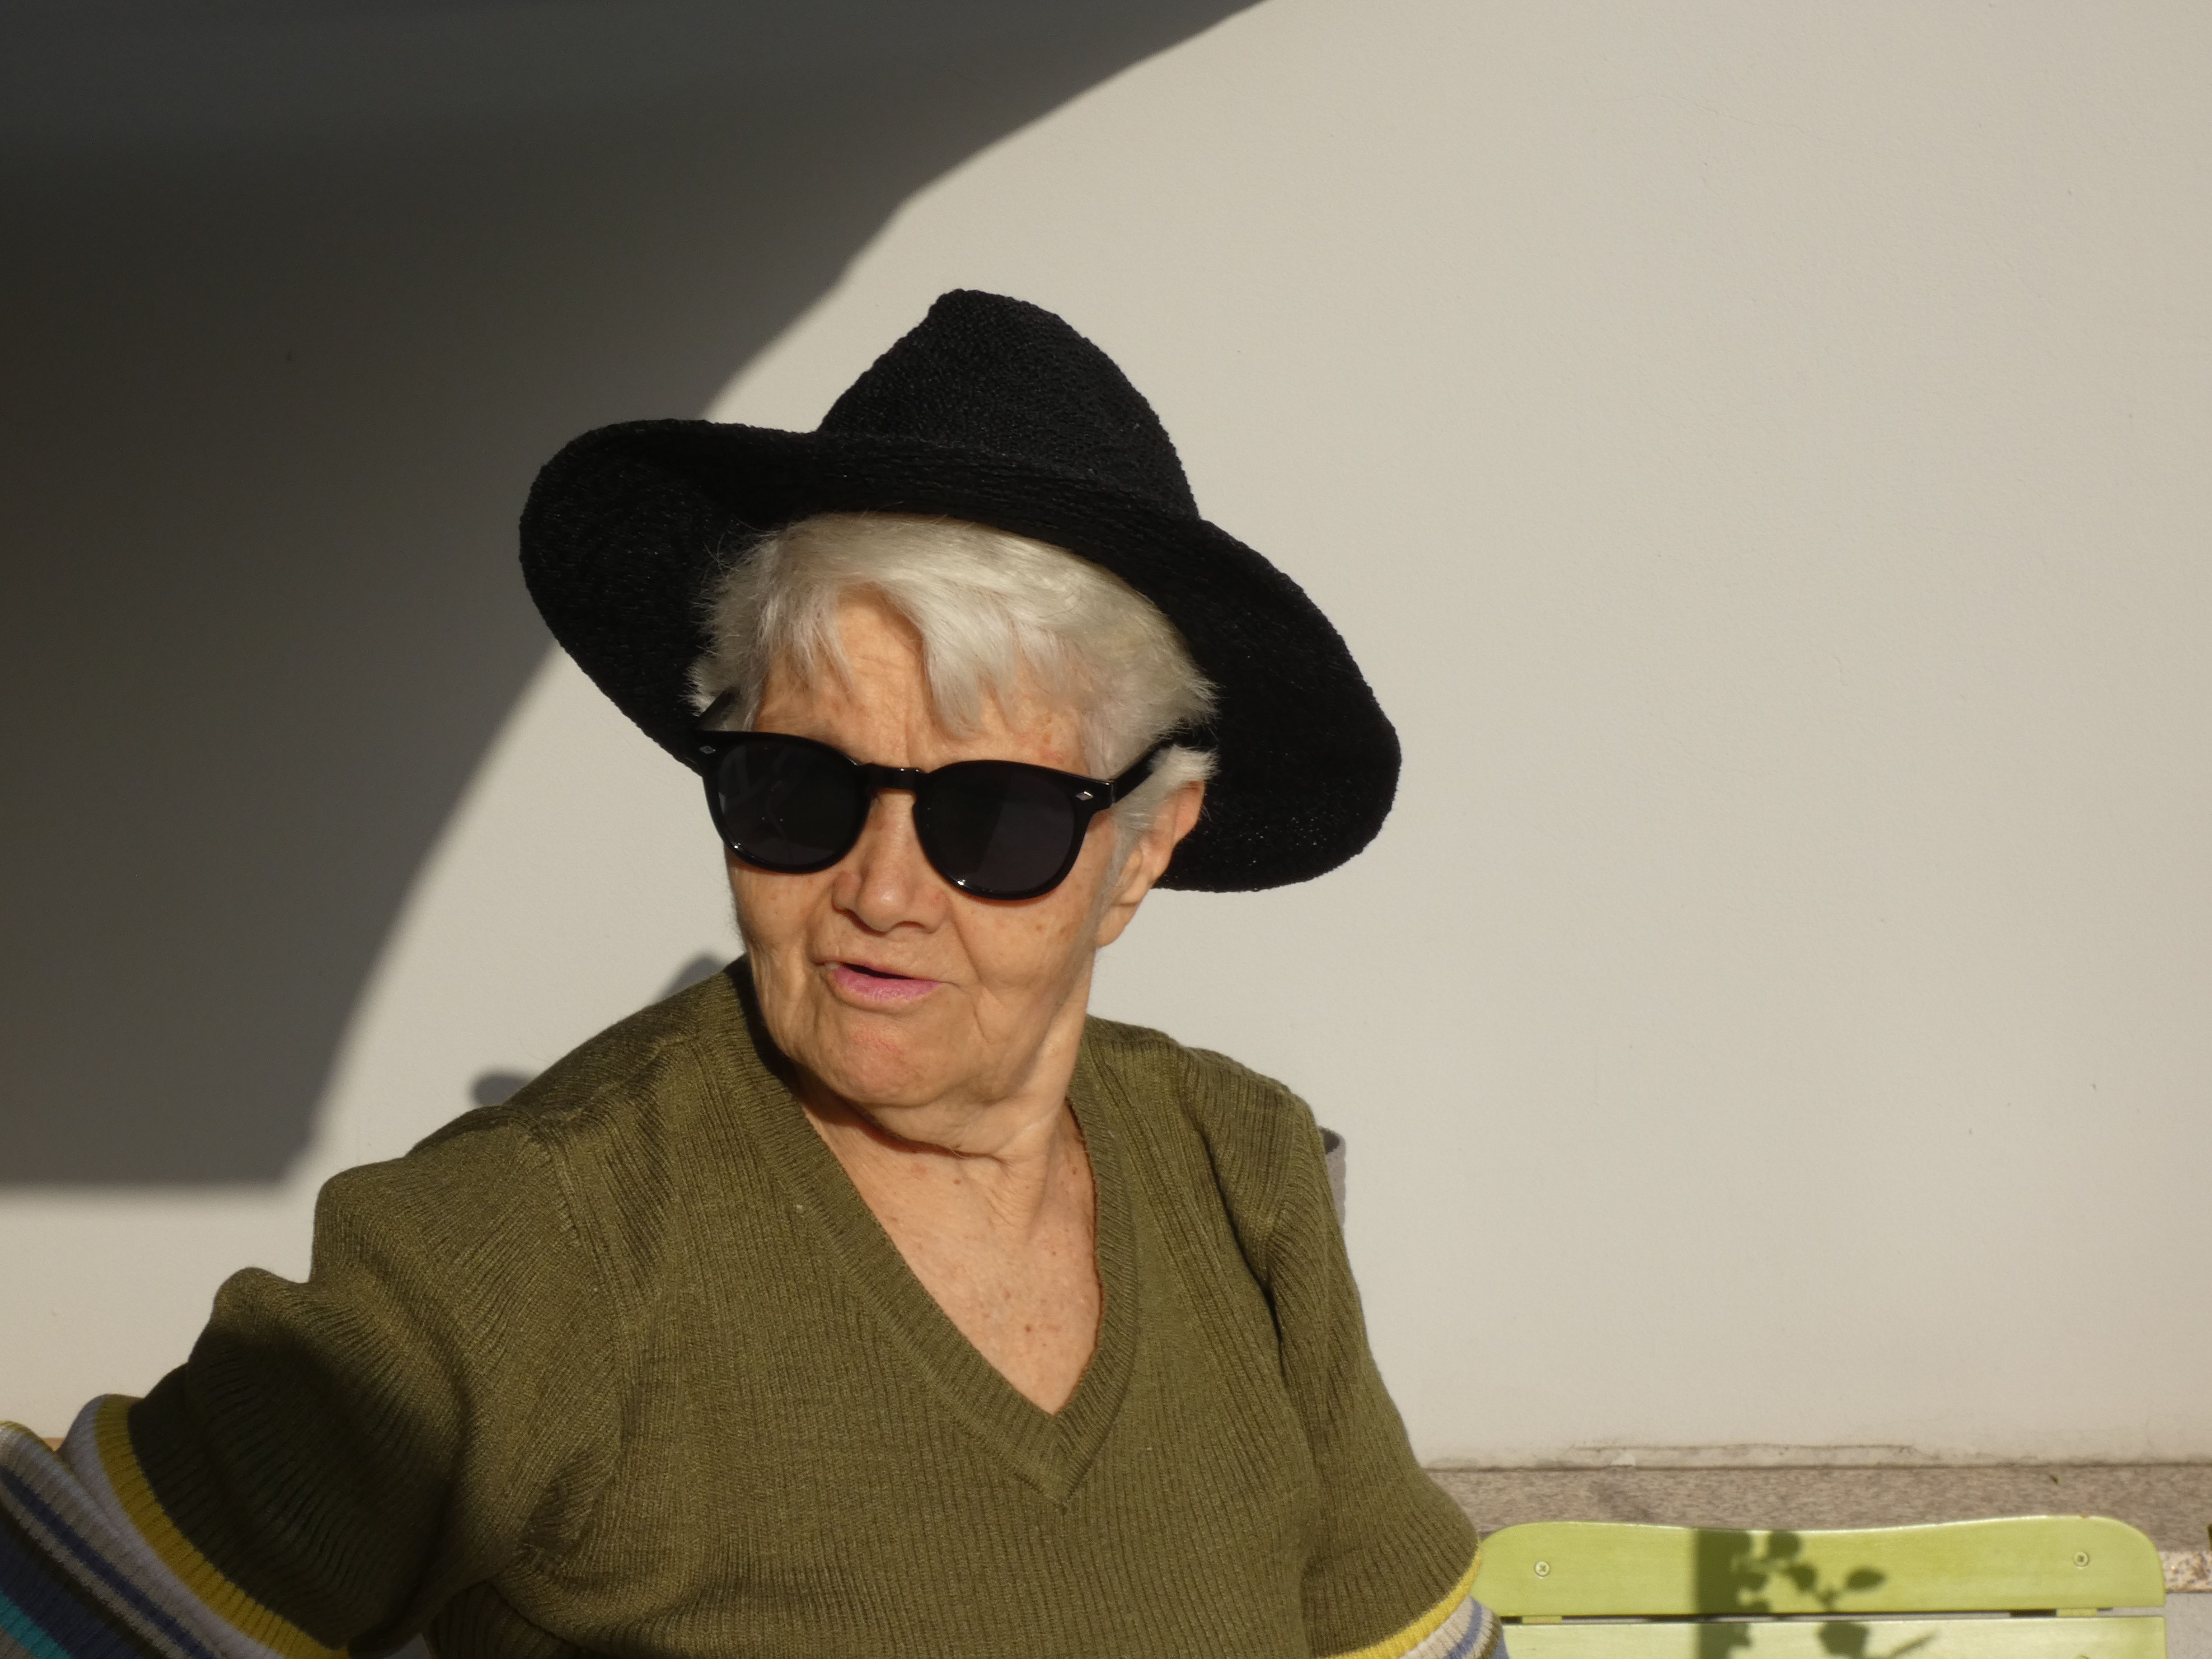 grandma with sunglasses and hat smiling